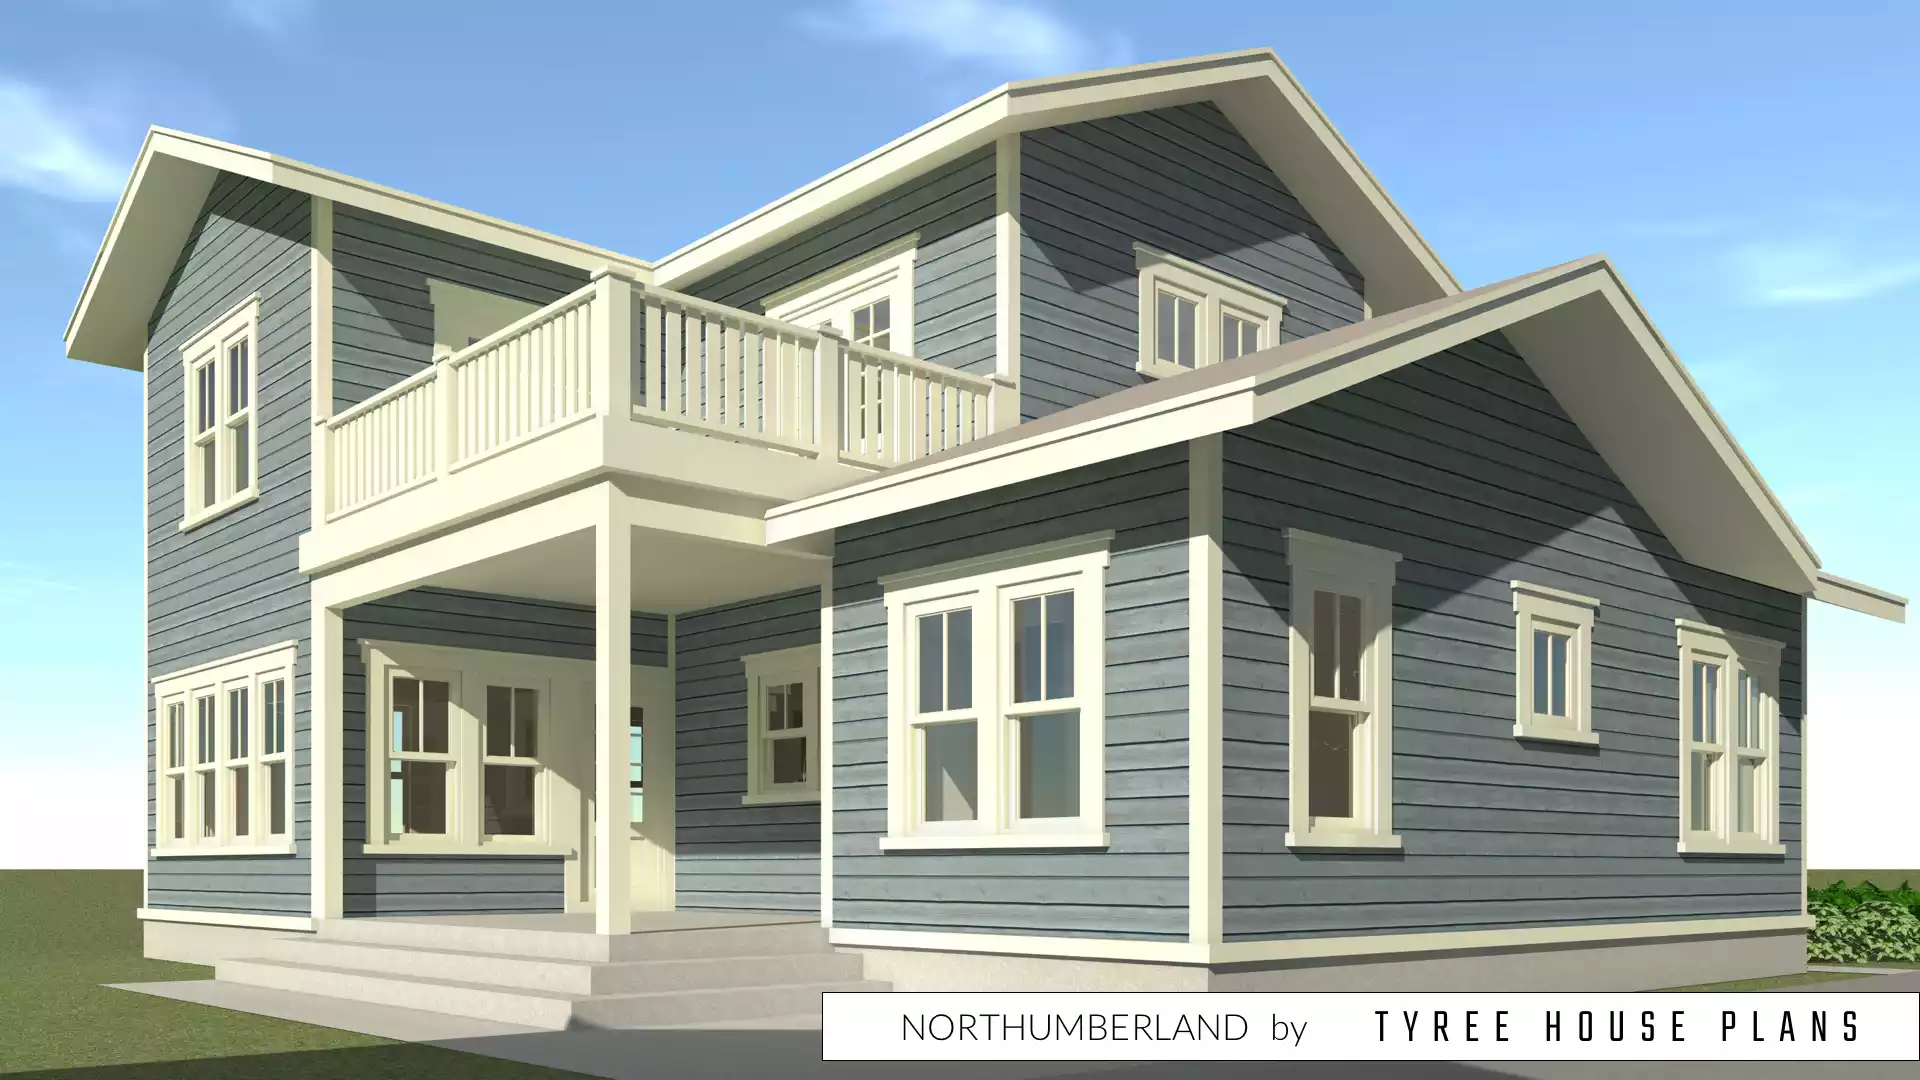 Rear porch and upper deck. Northumberland by Tyree House Plans.